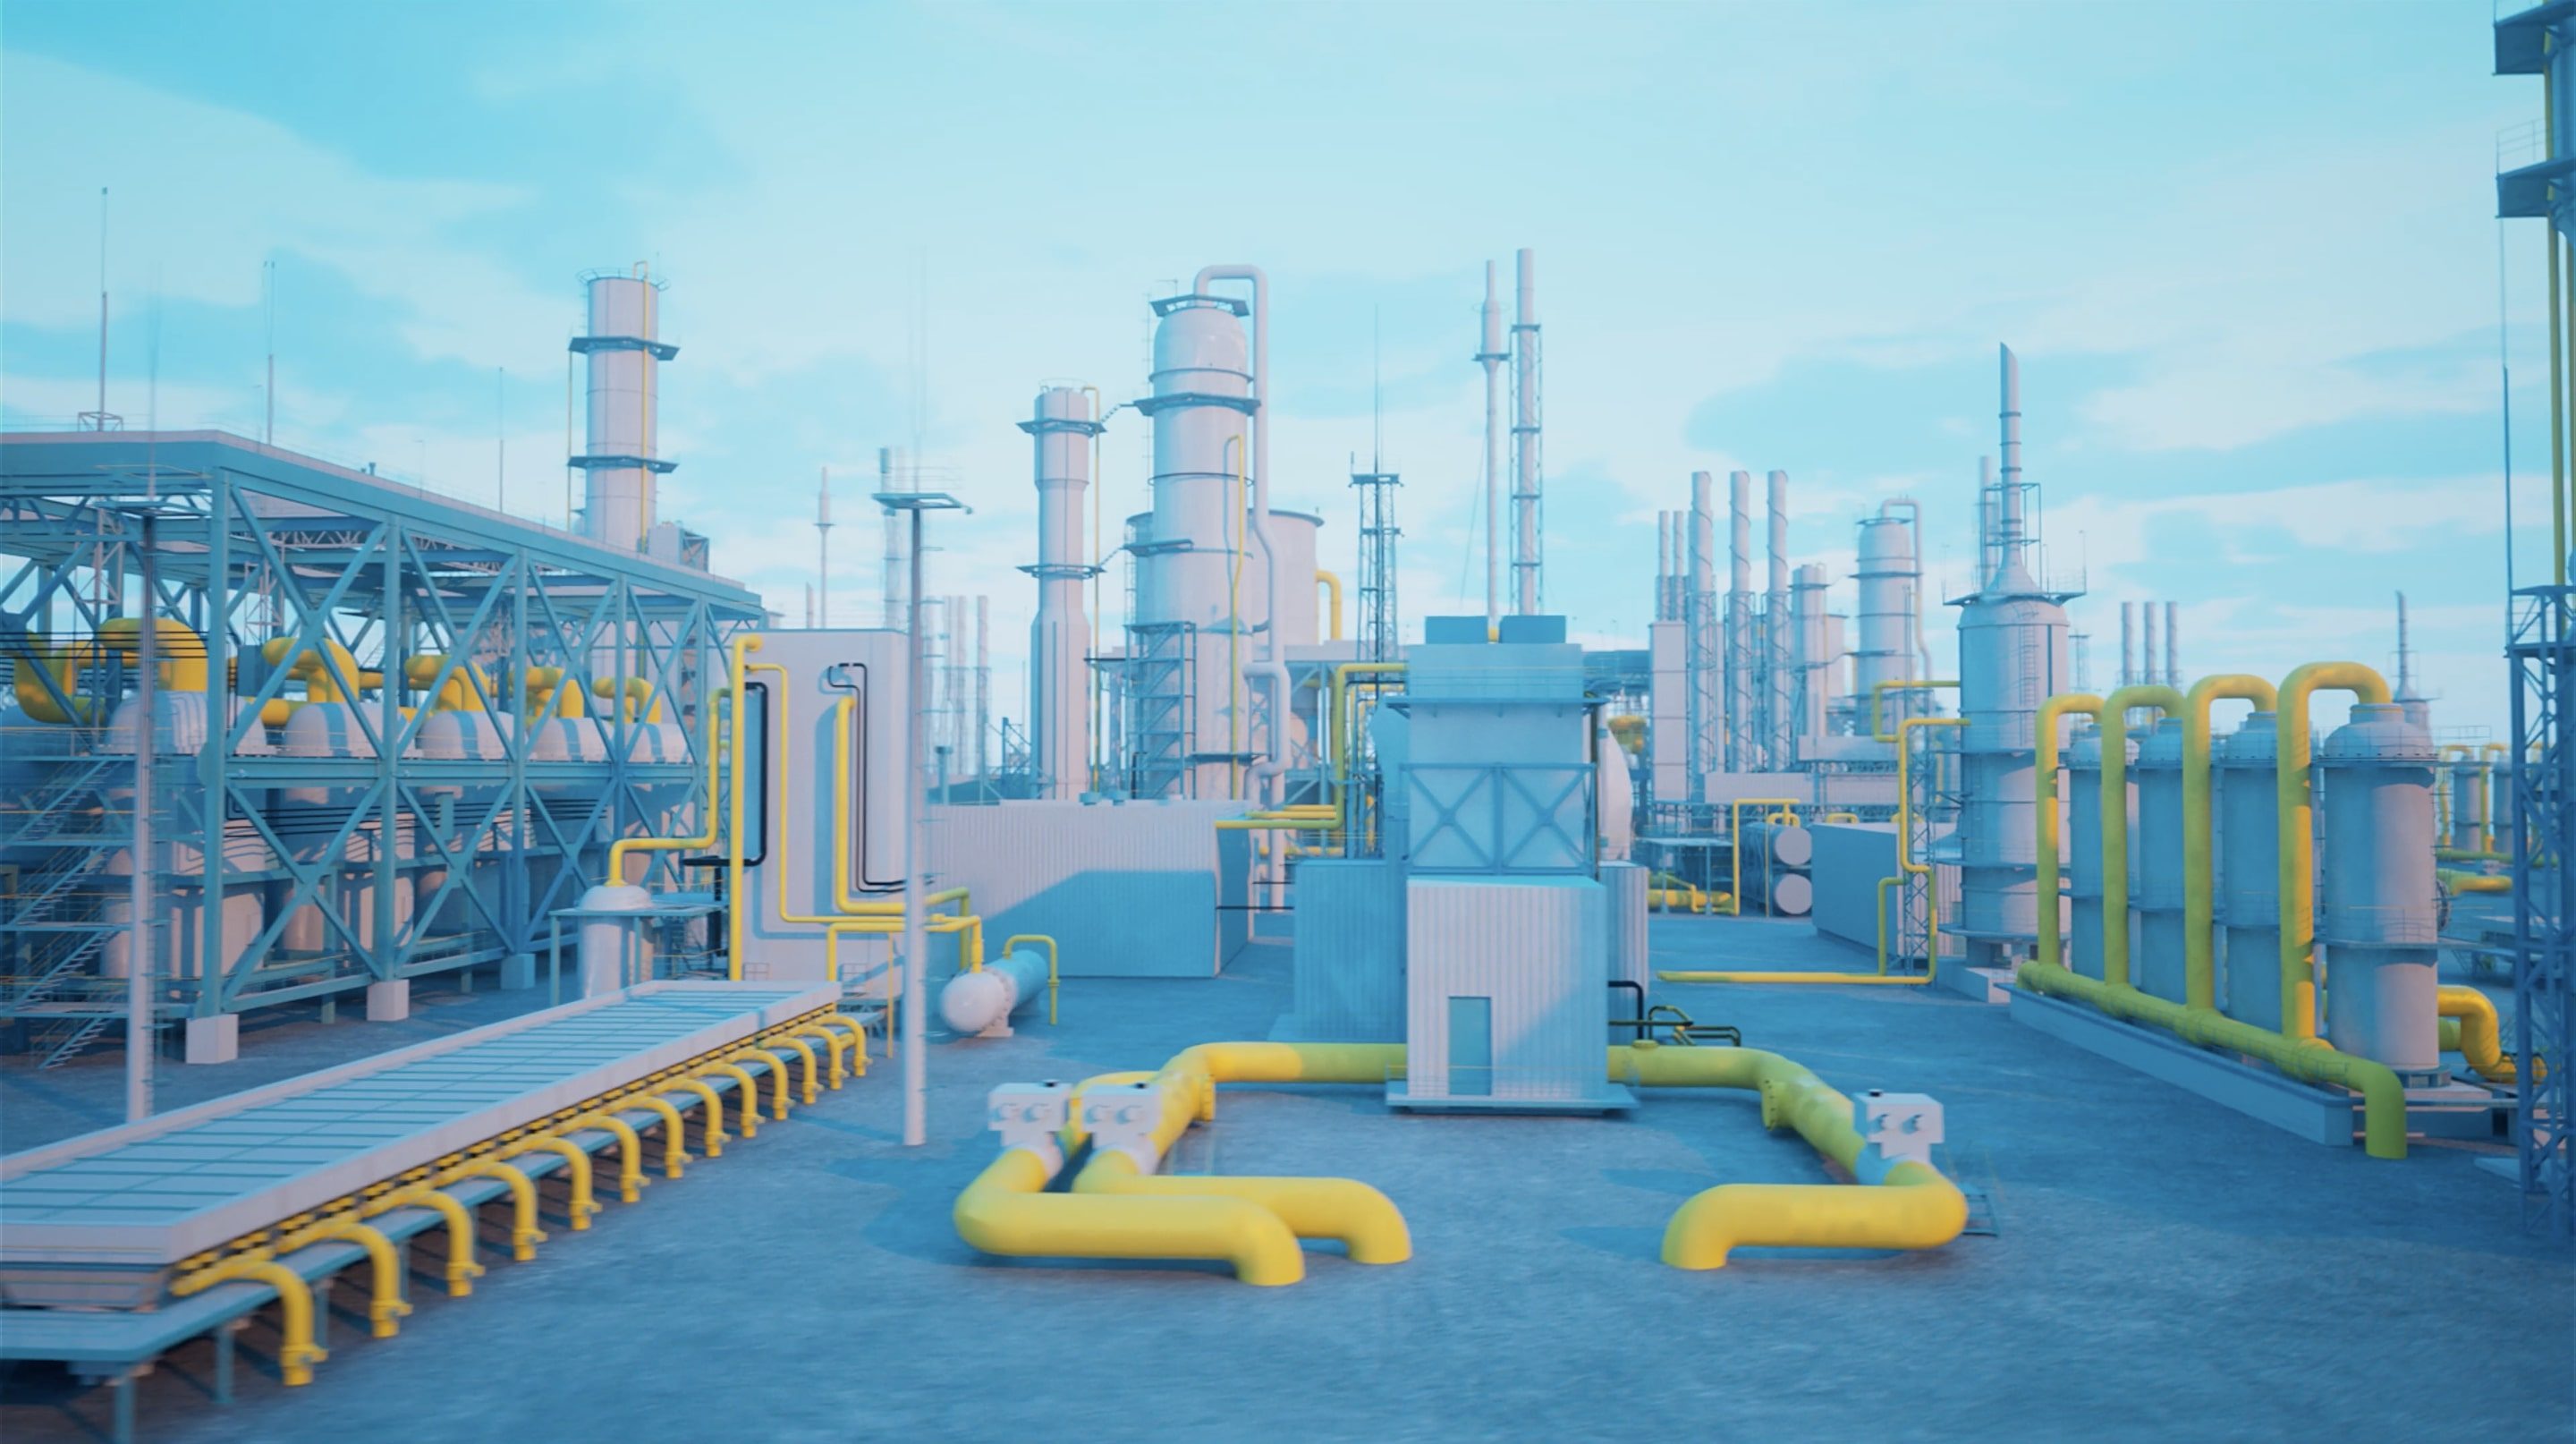 3D render of an industrial plant with yellow accents